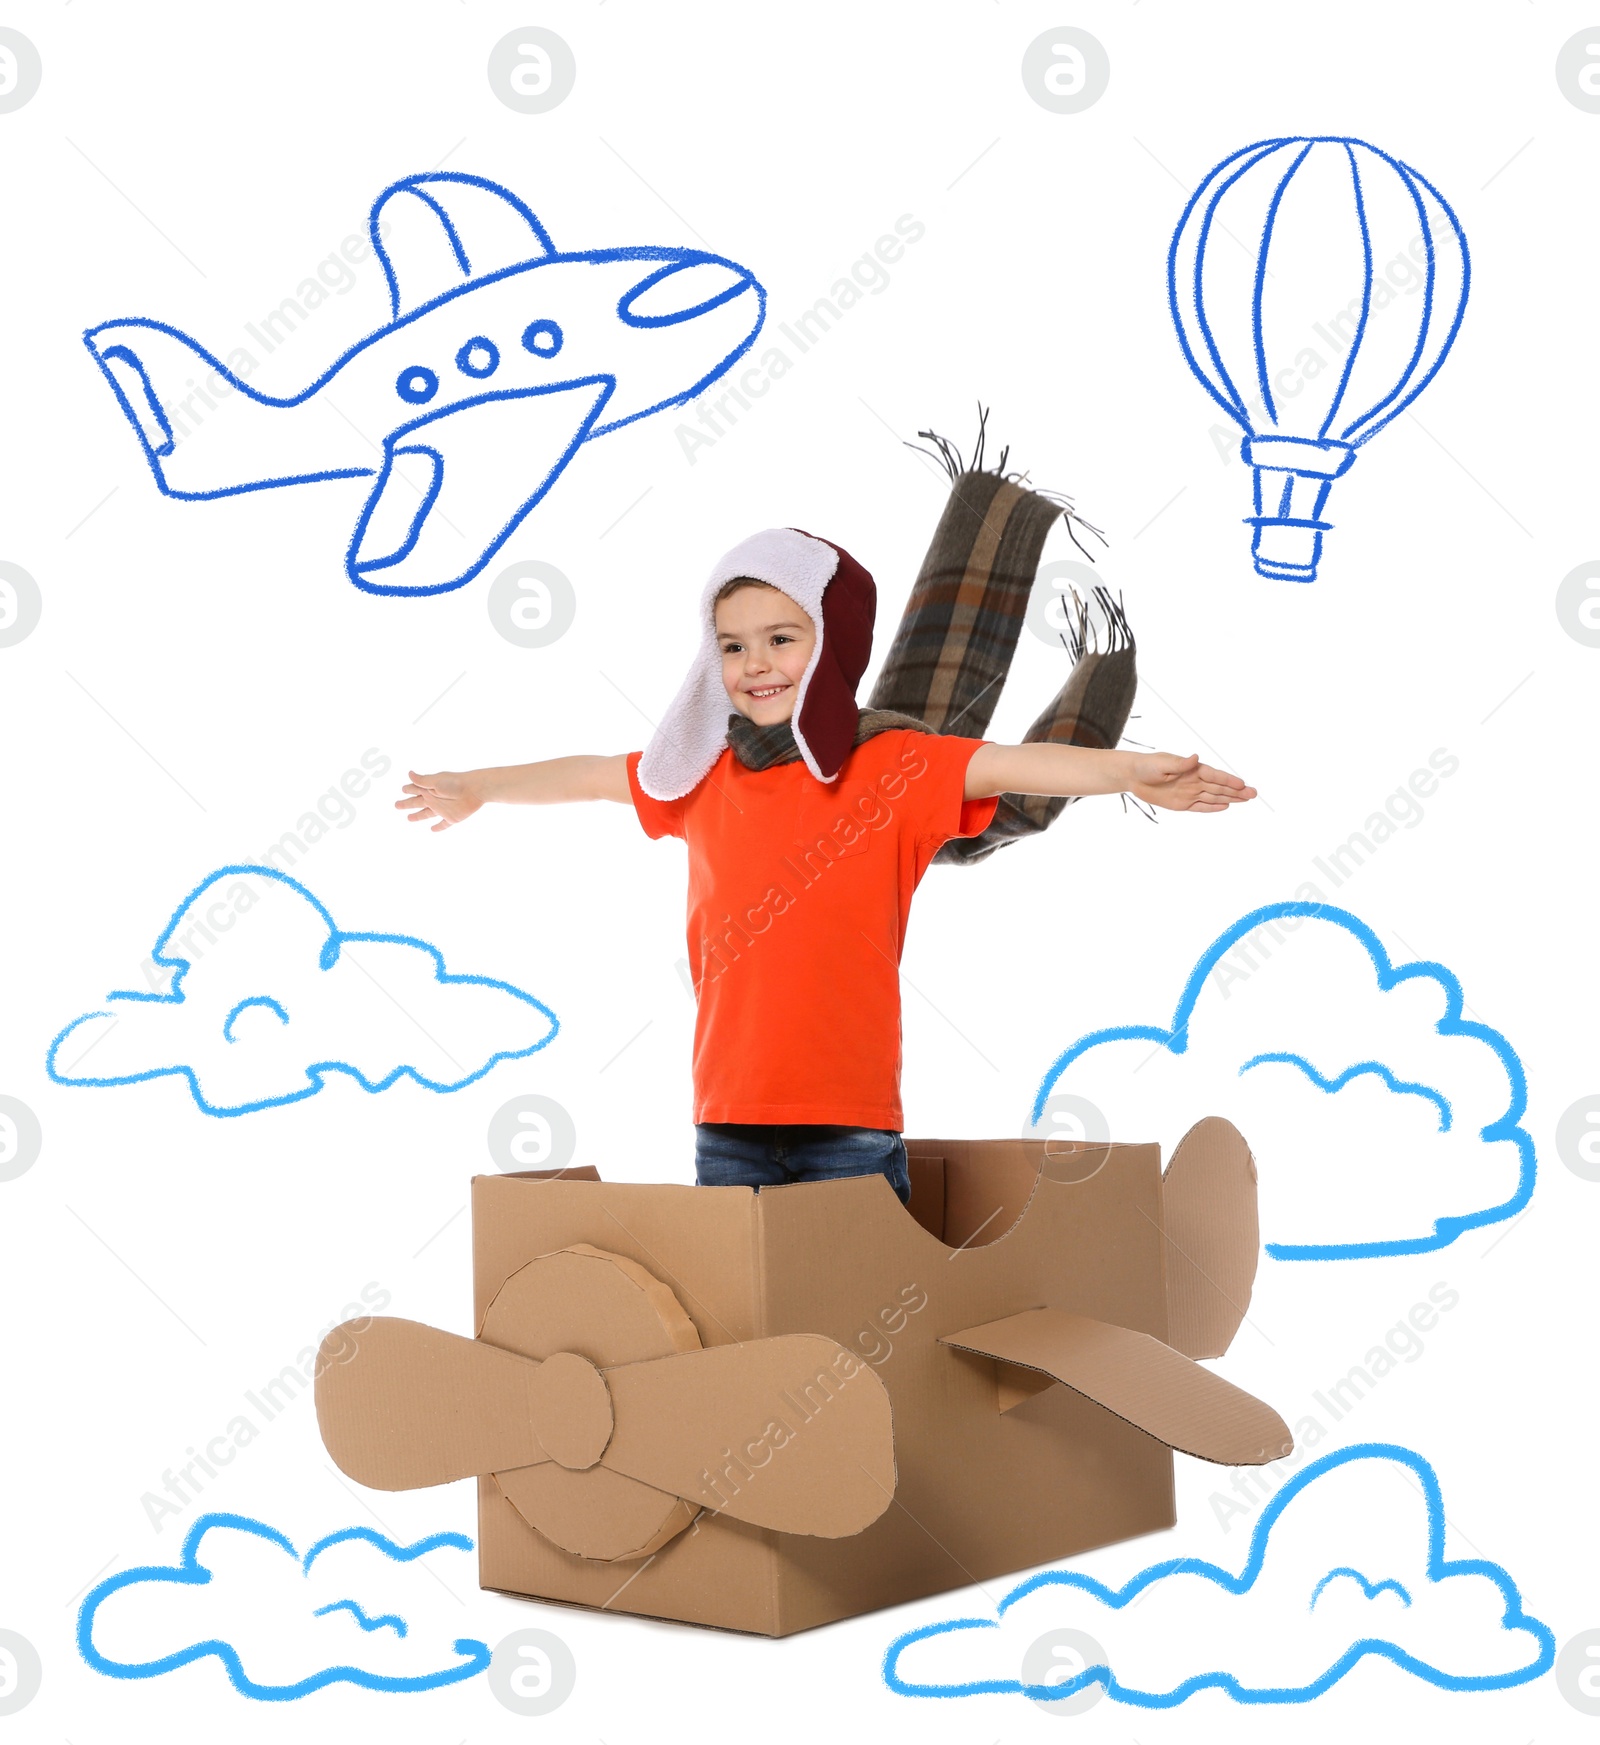 Image of Cute little child playing in cardboard airplane on white background with illustrations